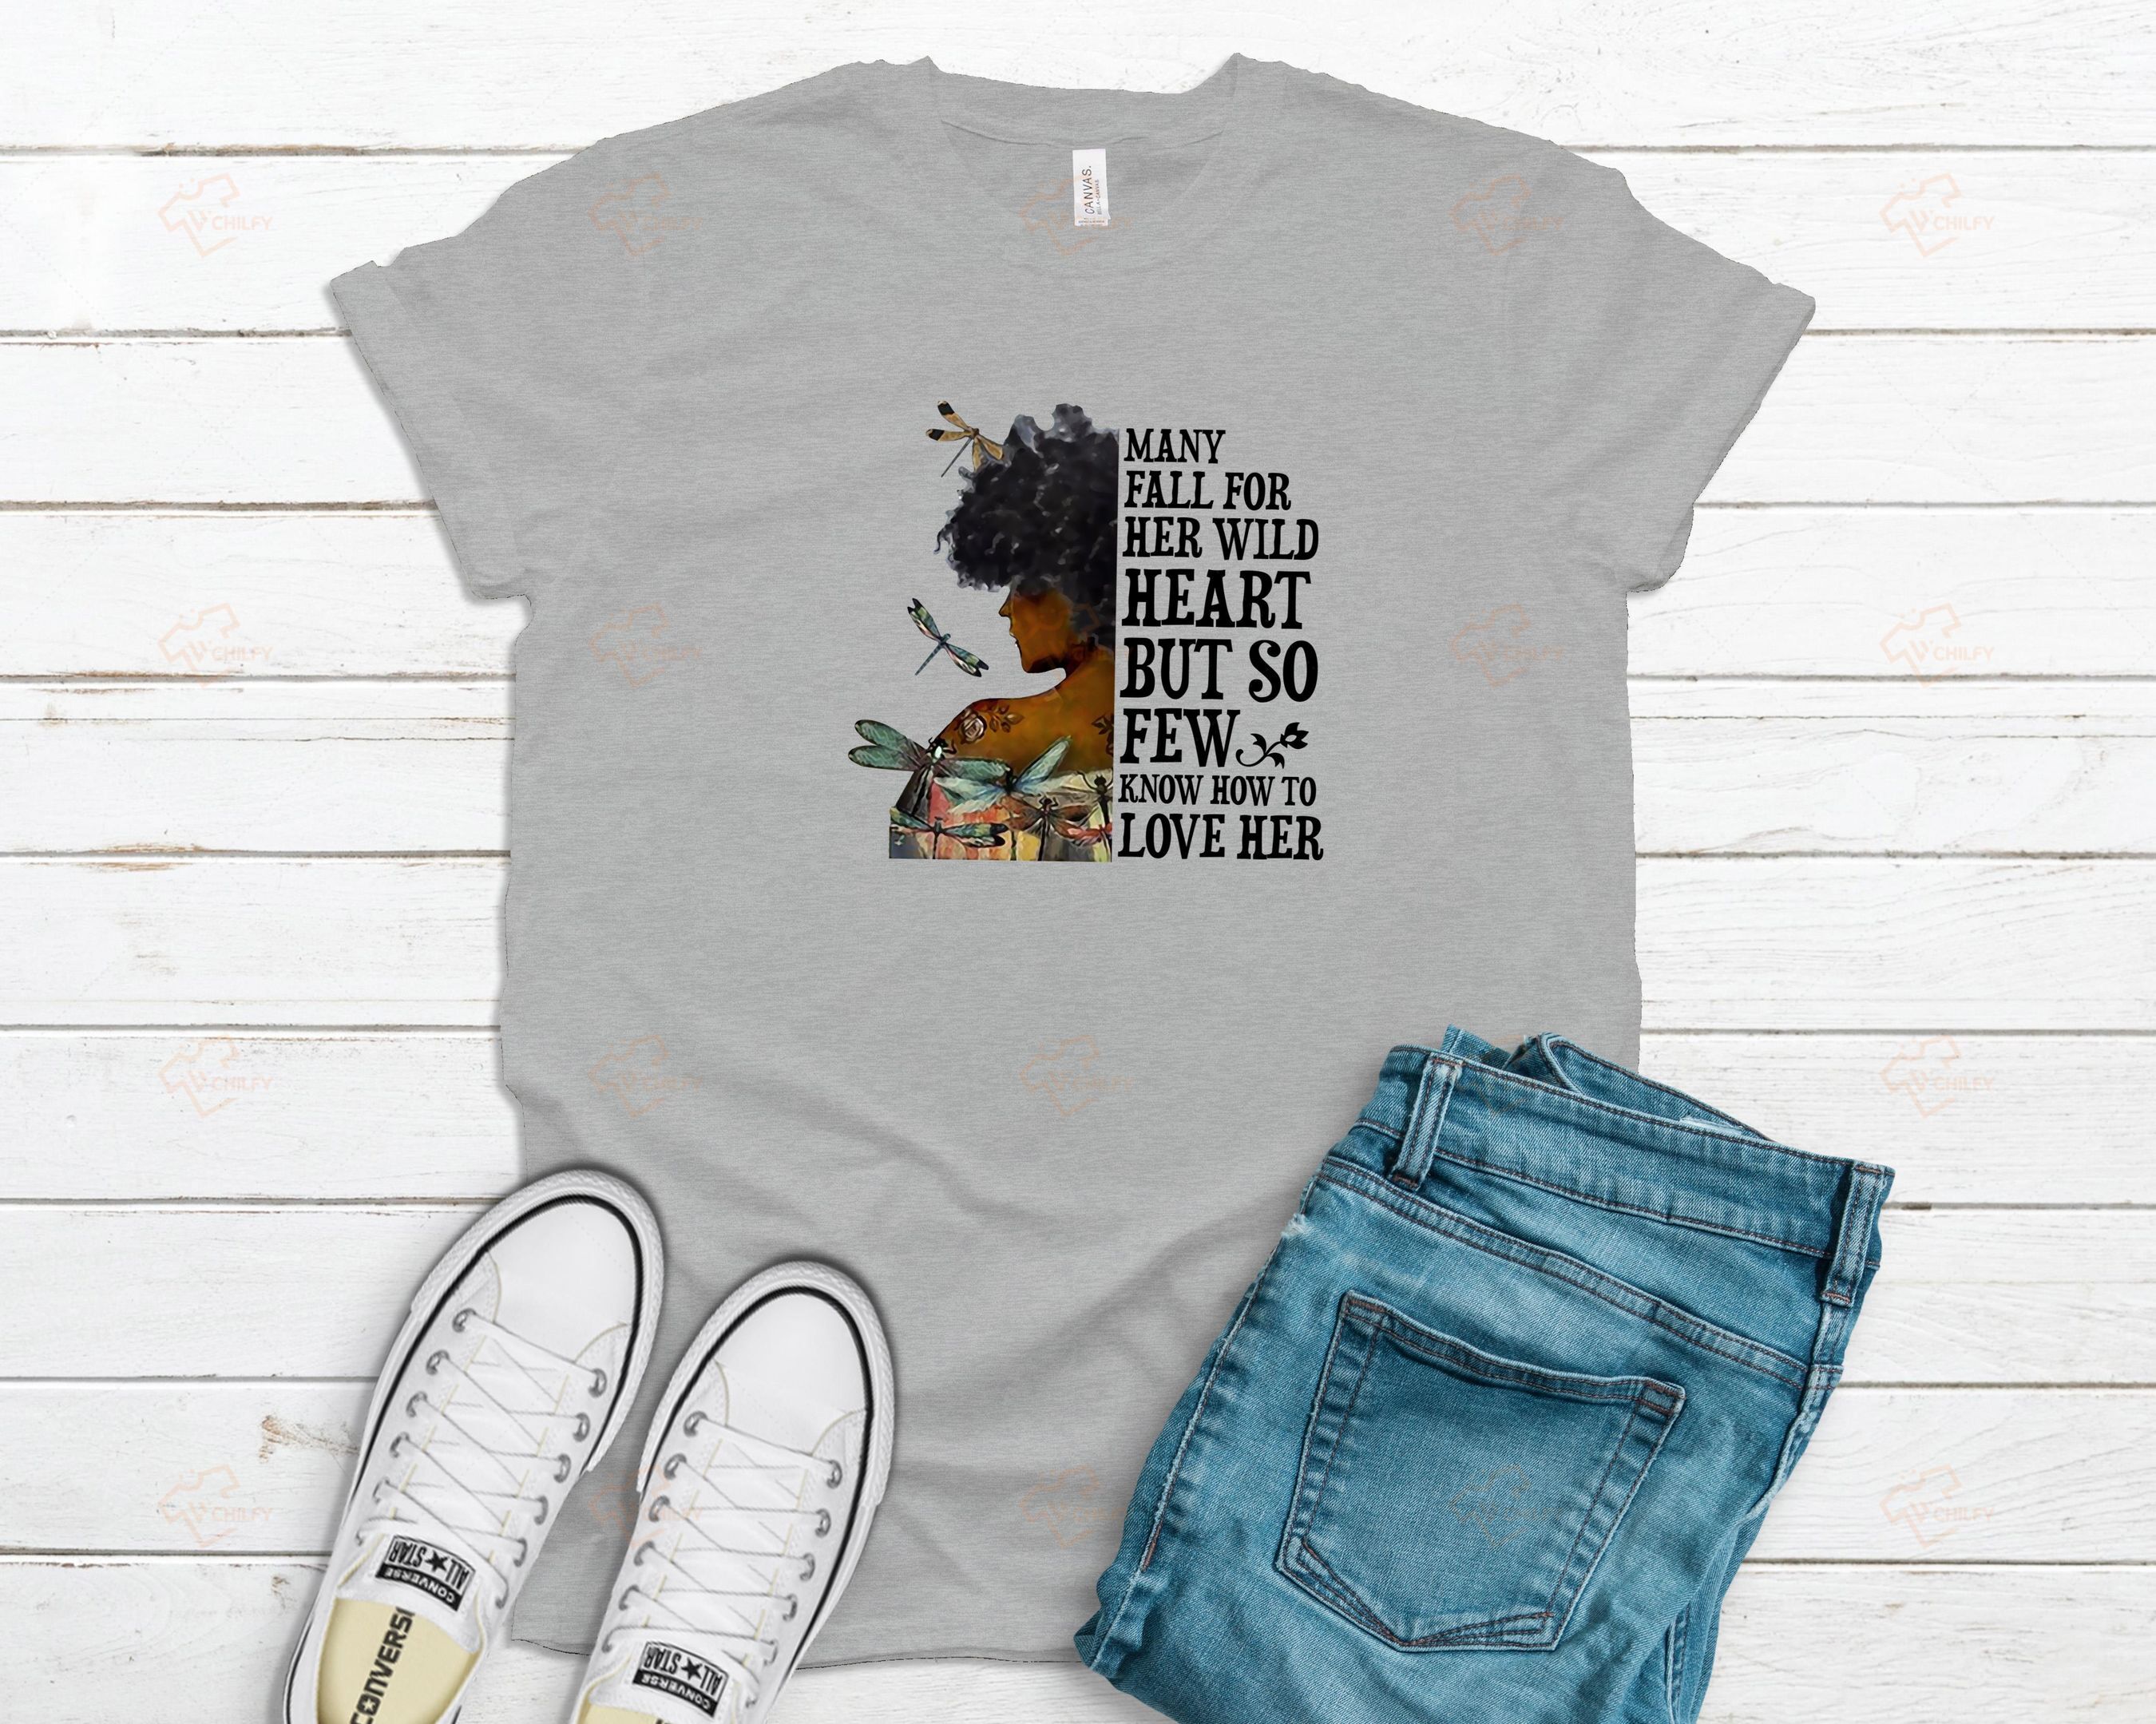 Many fall for her wild heart but so few know how to love her, afro girl shirt